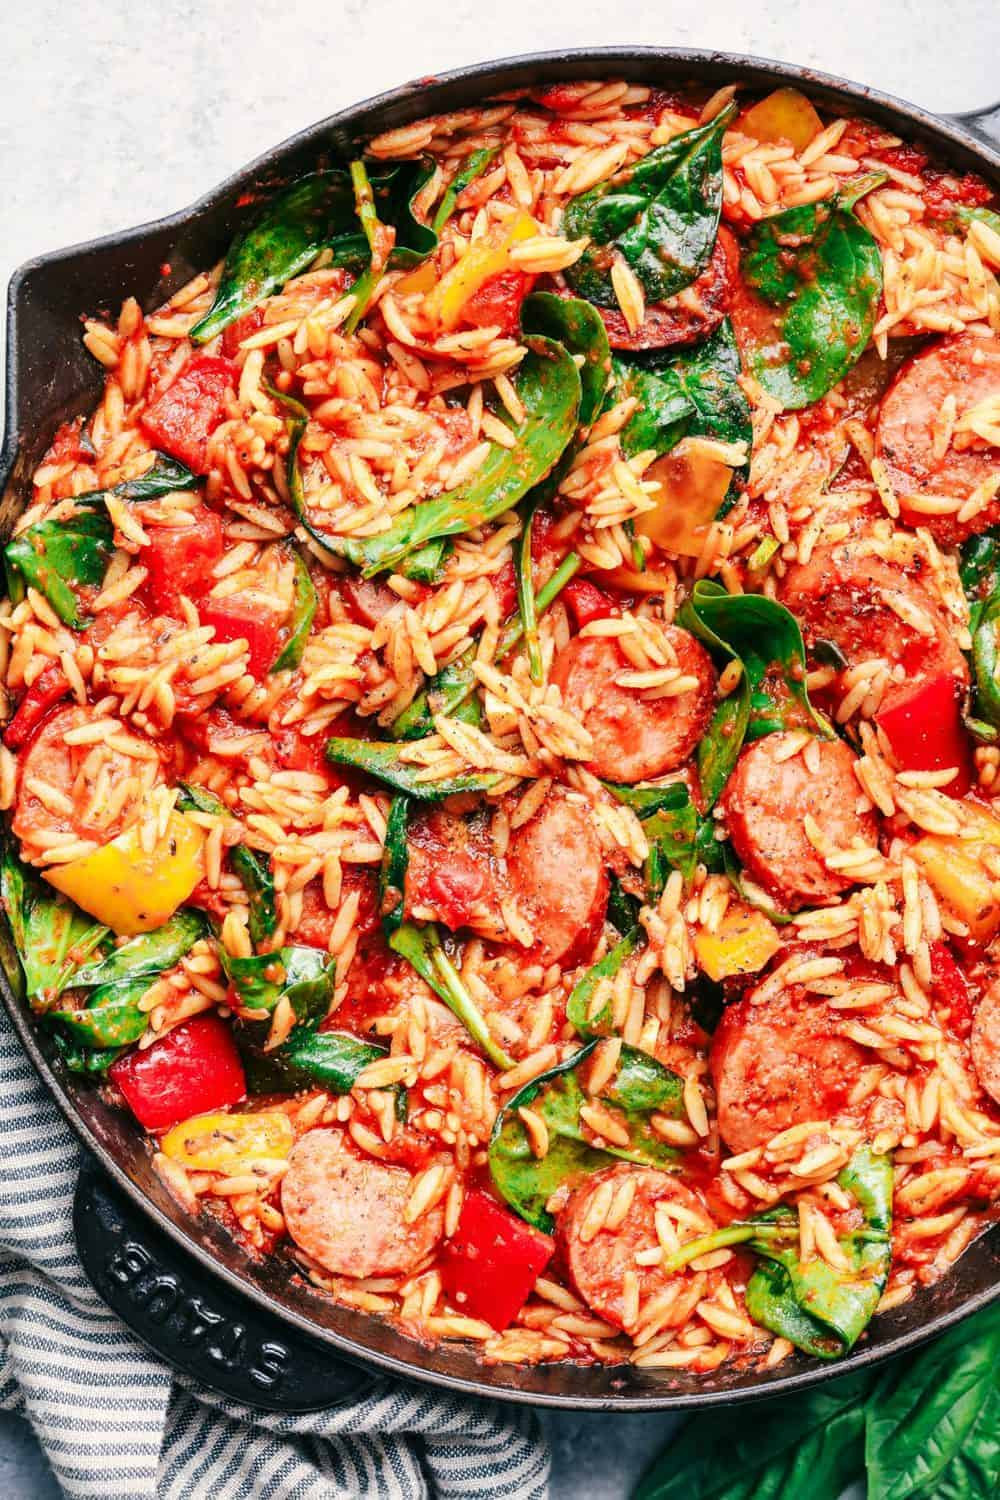 Recipes Using Italian Sausage
 Italian Sausage and Ve able Orzo Skillet